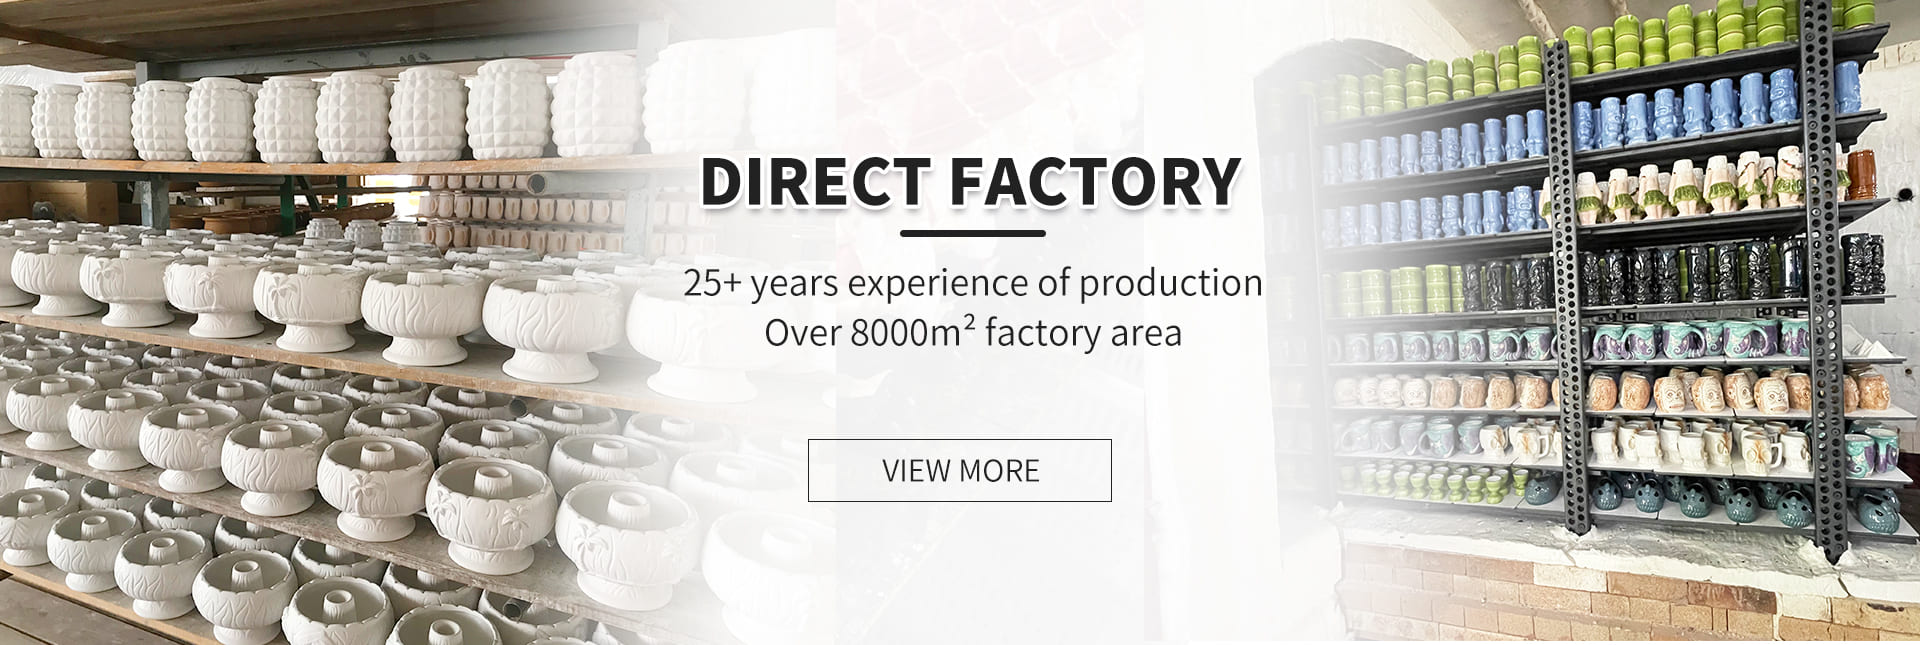 Direct Factory